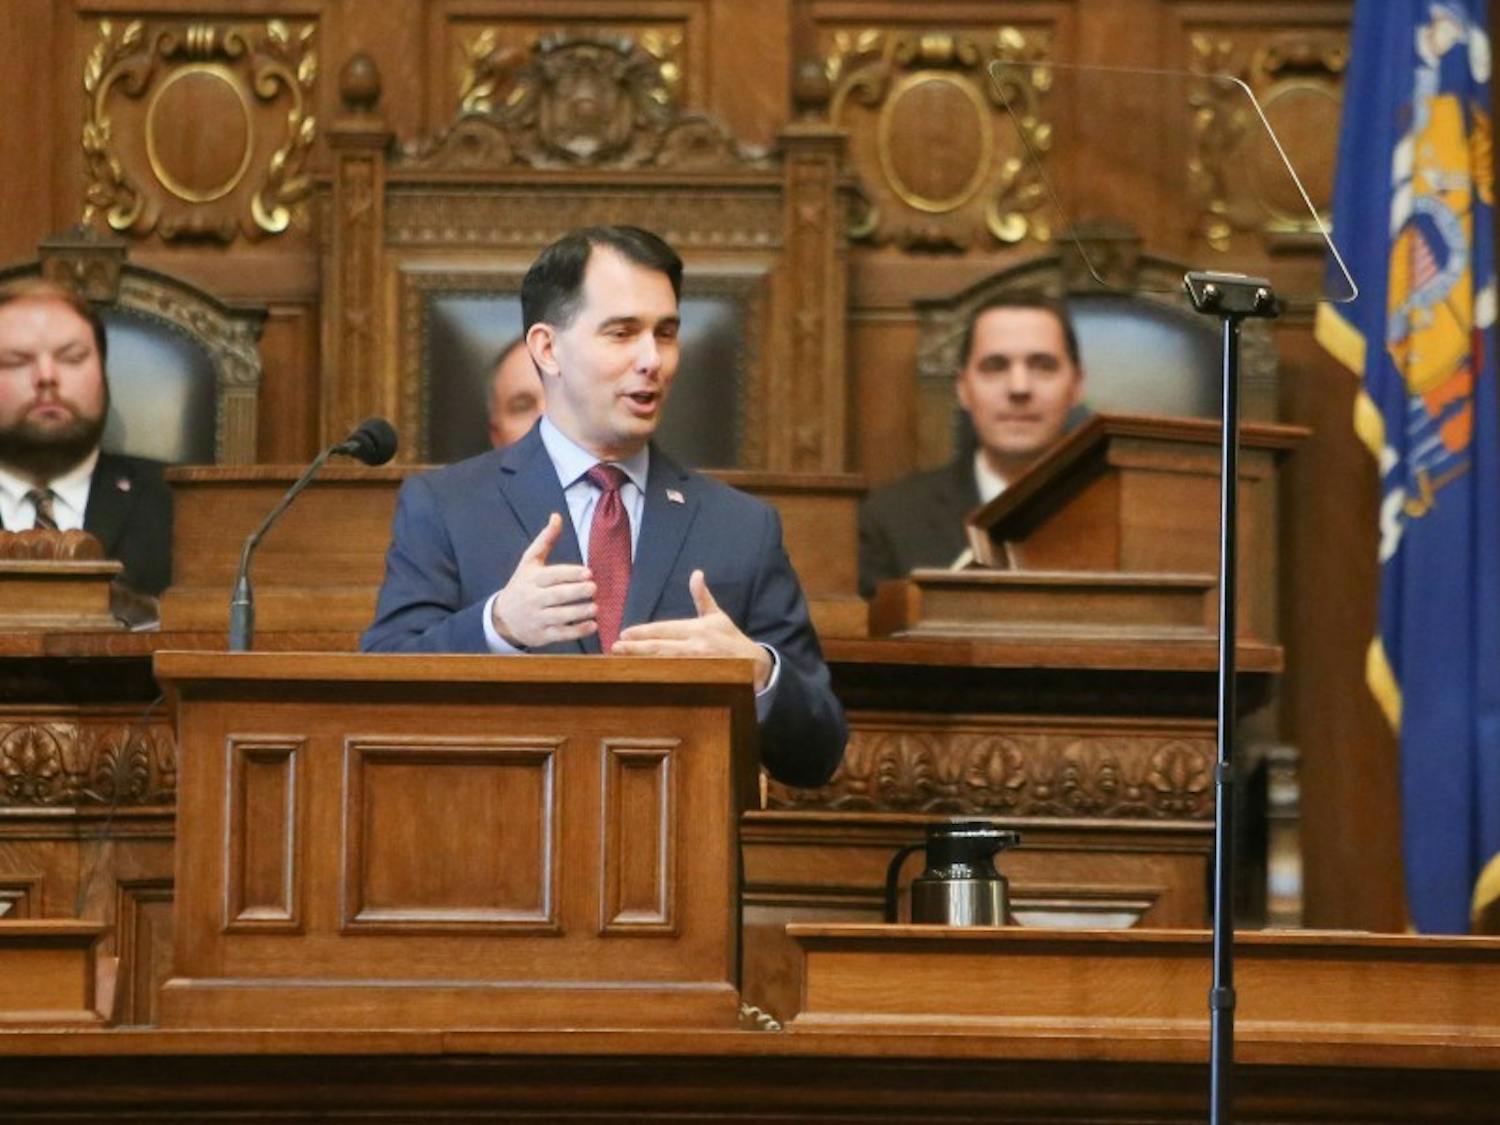 Walker’s proposal to end a commission on labor could enhance government efficiency but some worry the commission’s disappearance would hinder labor workers’ protections.